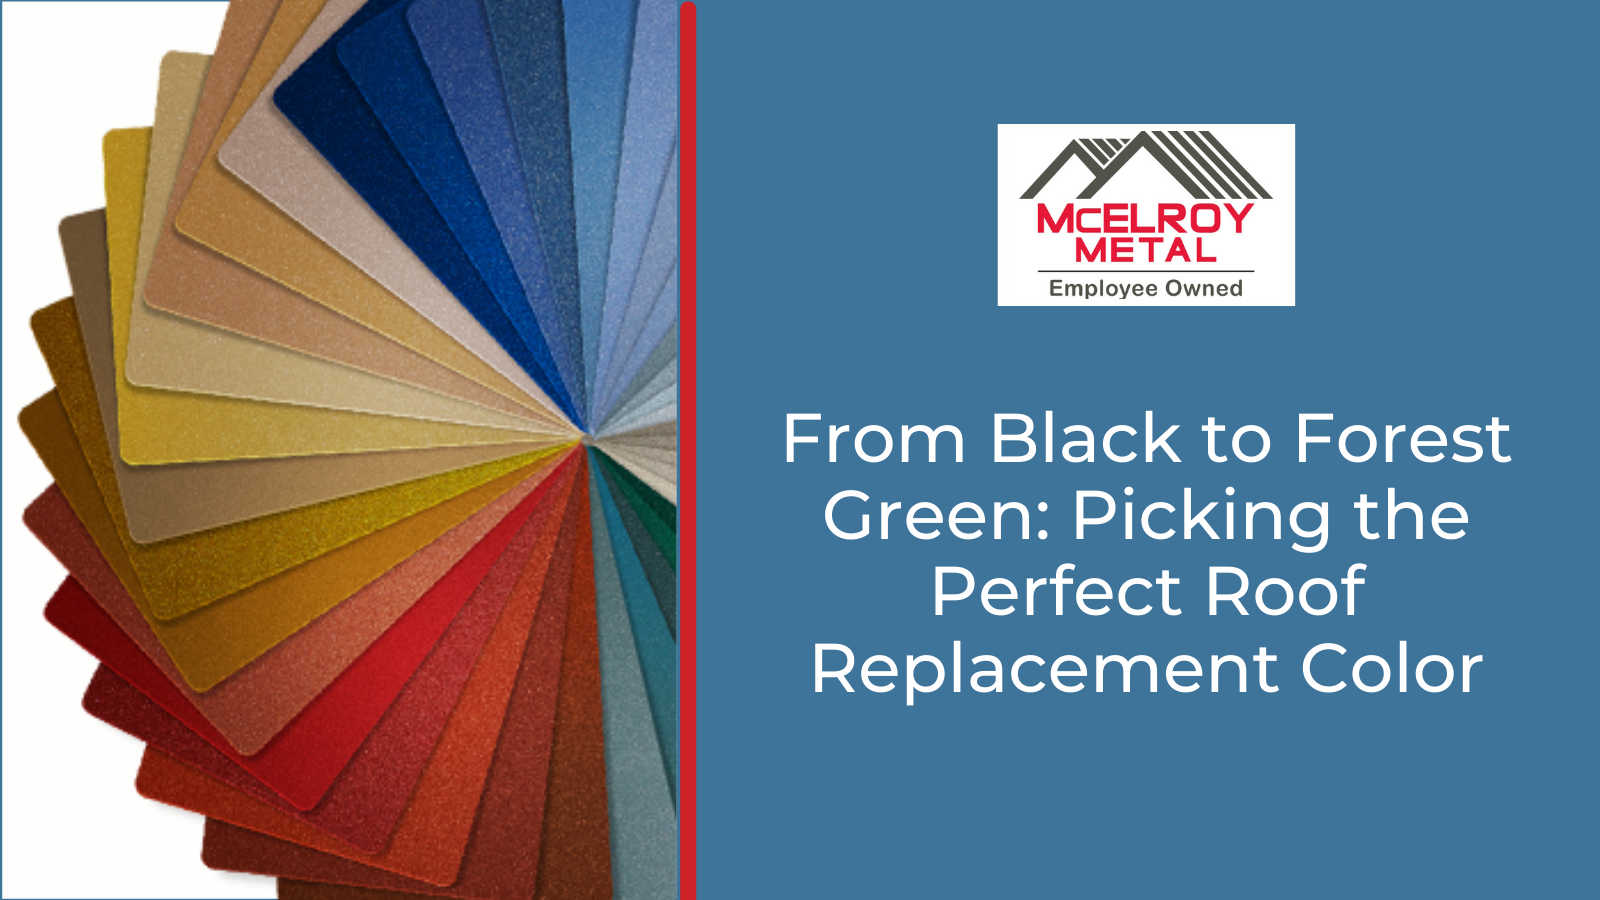 From Black to Forest Green: Picking the Perfect Roof Replacement Color